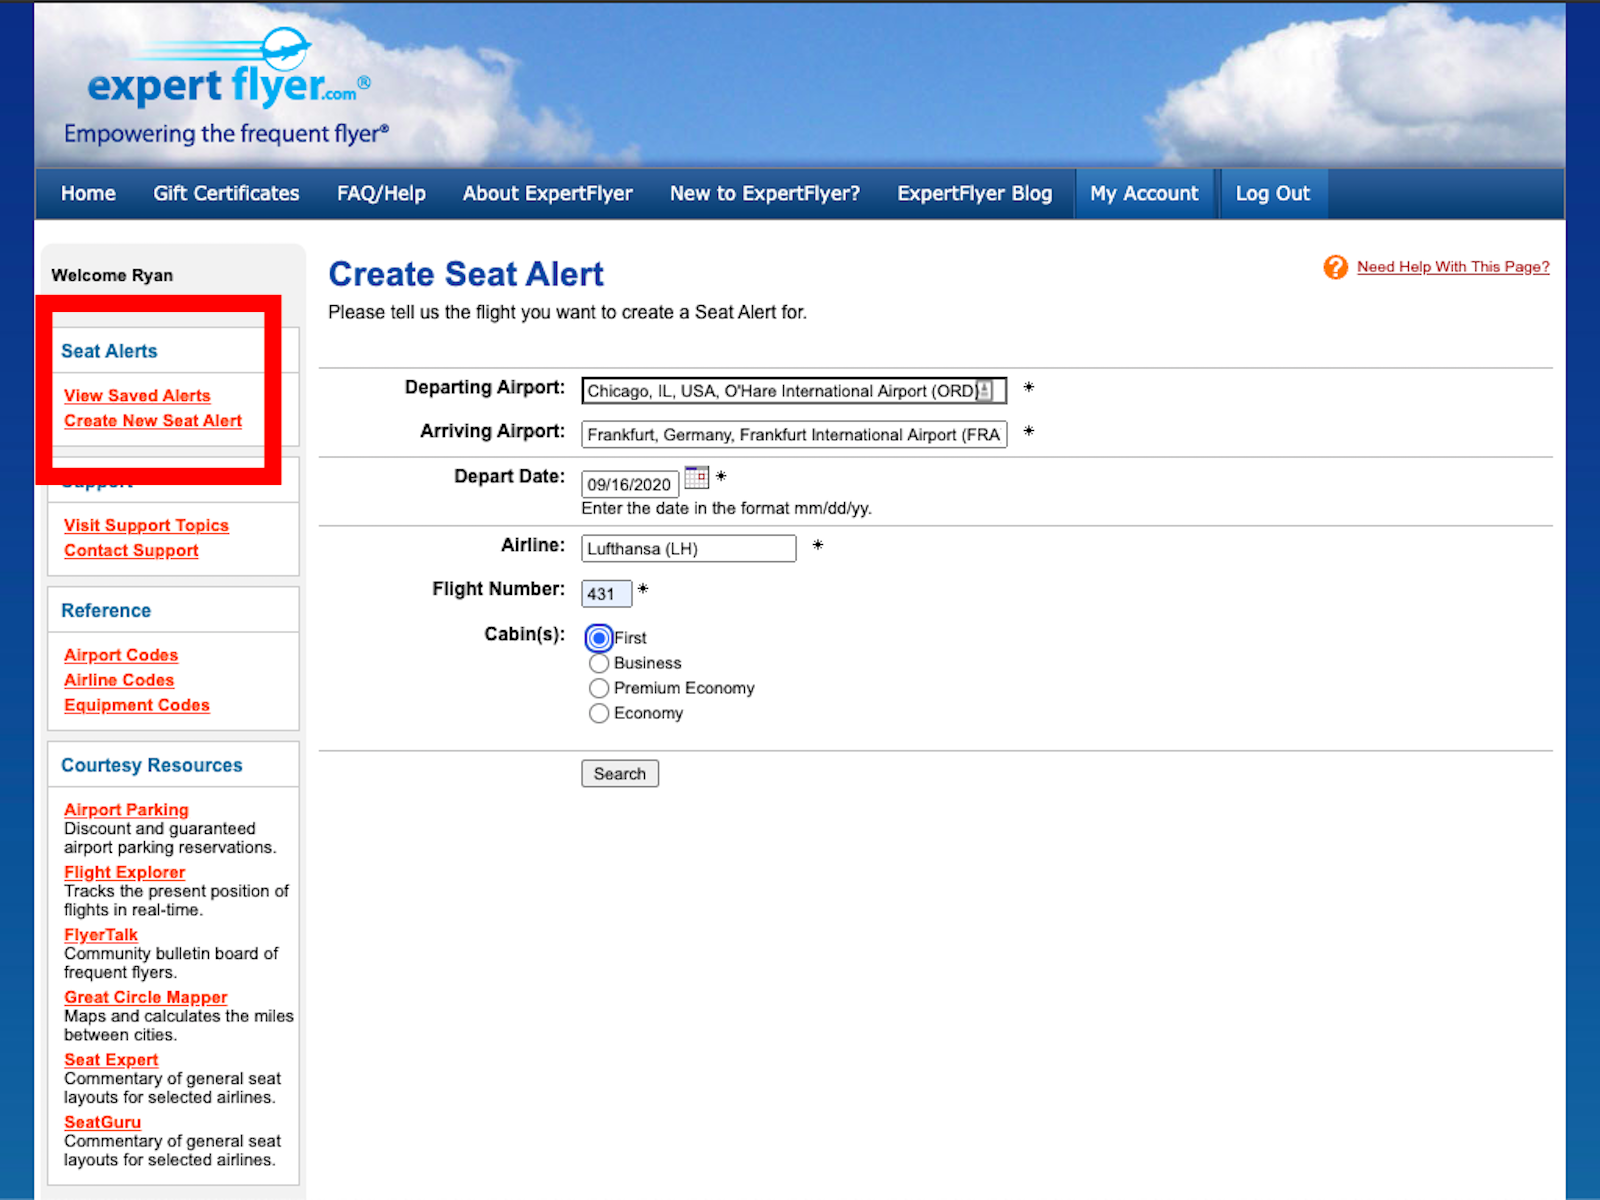 Use ExpertFlyer to confirm seat availability